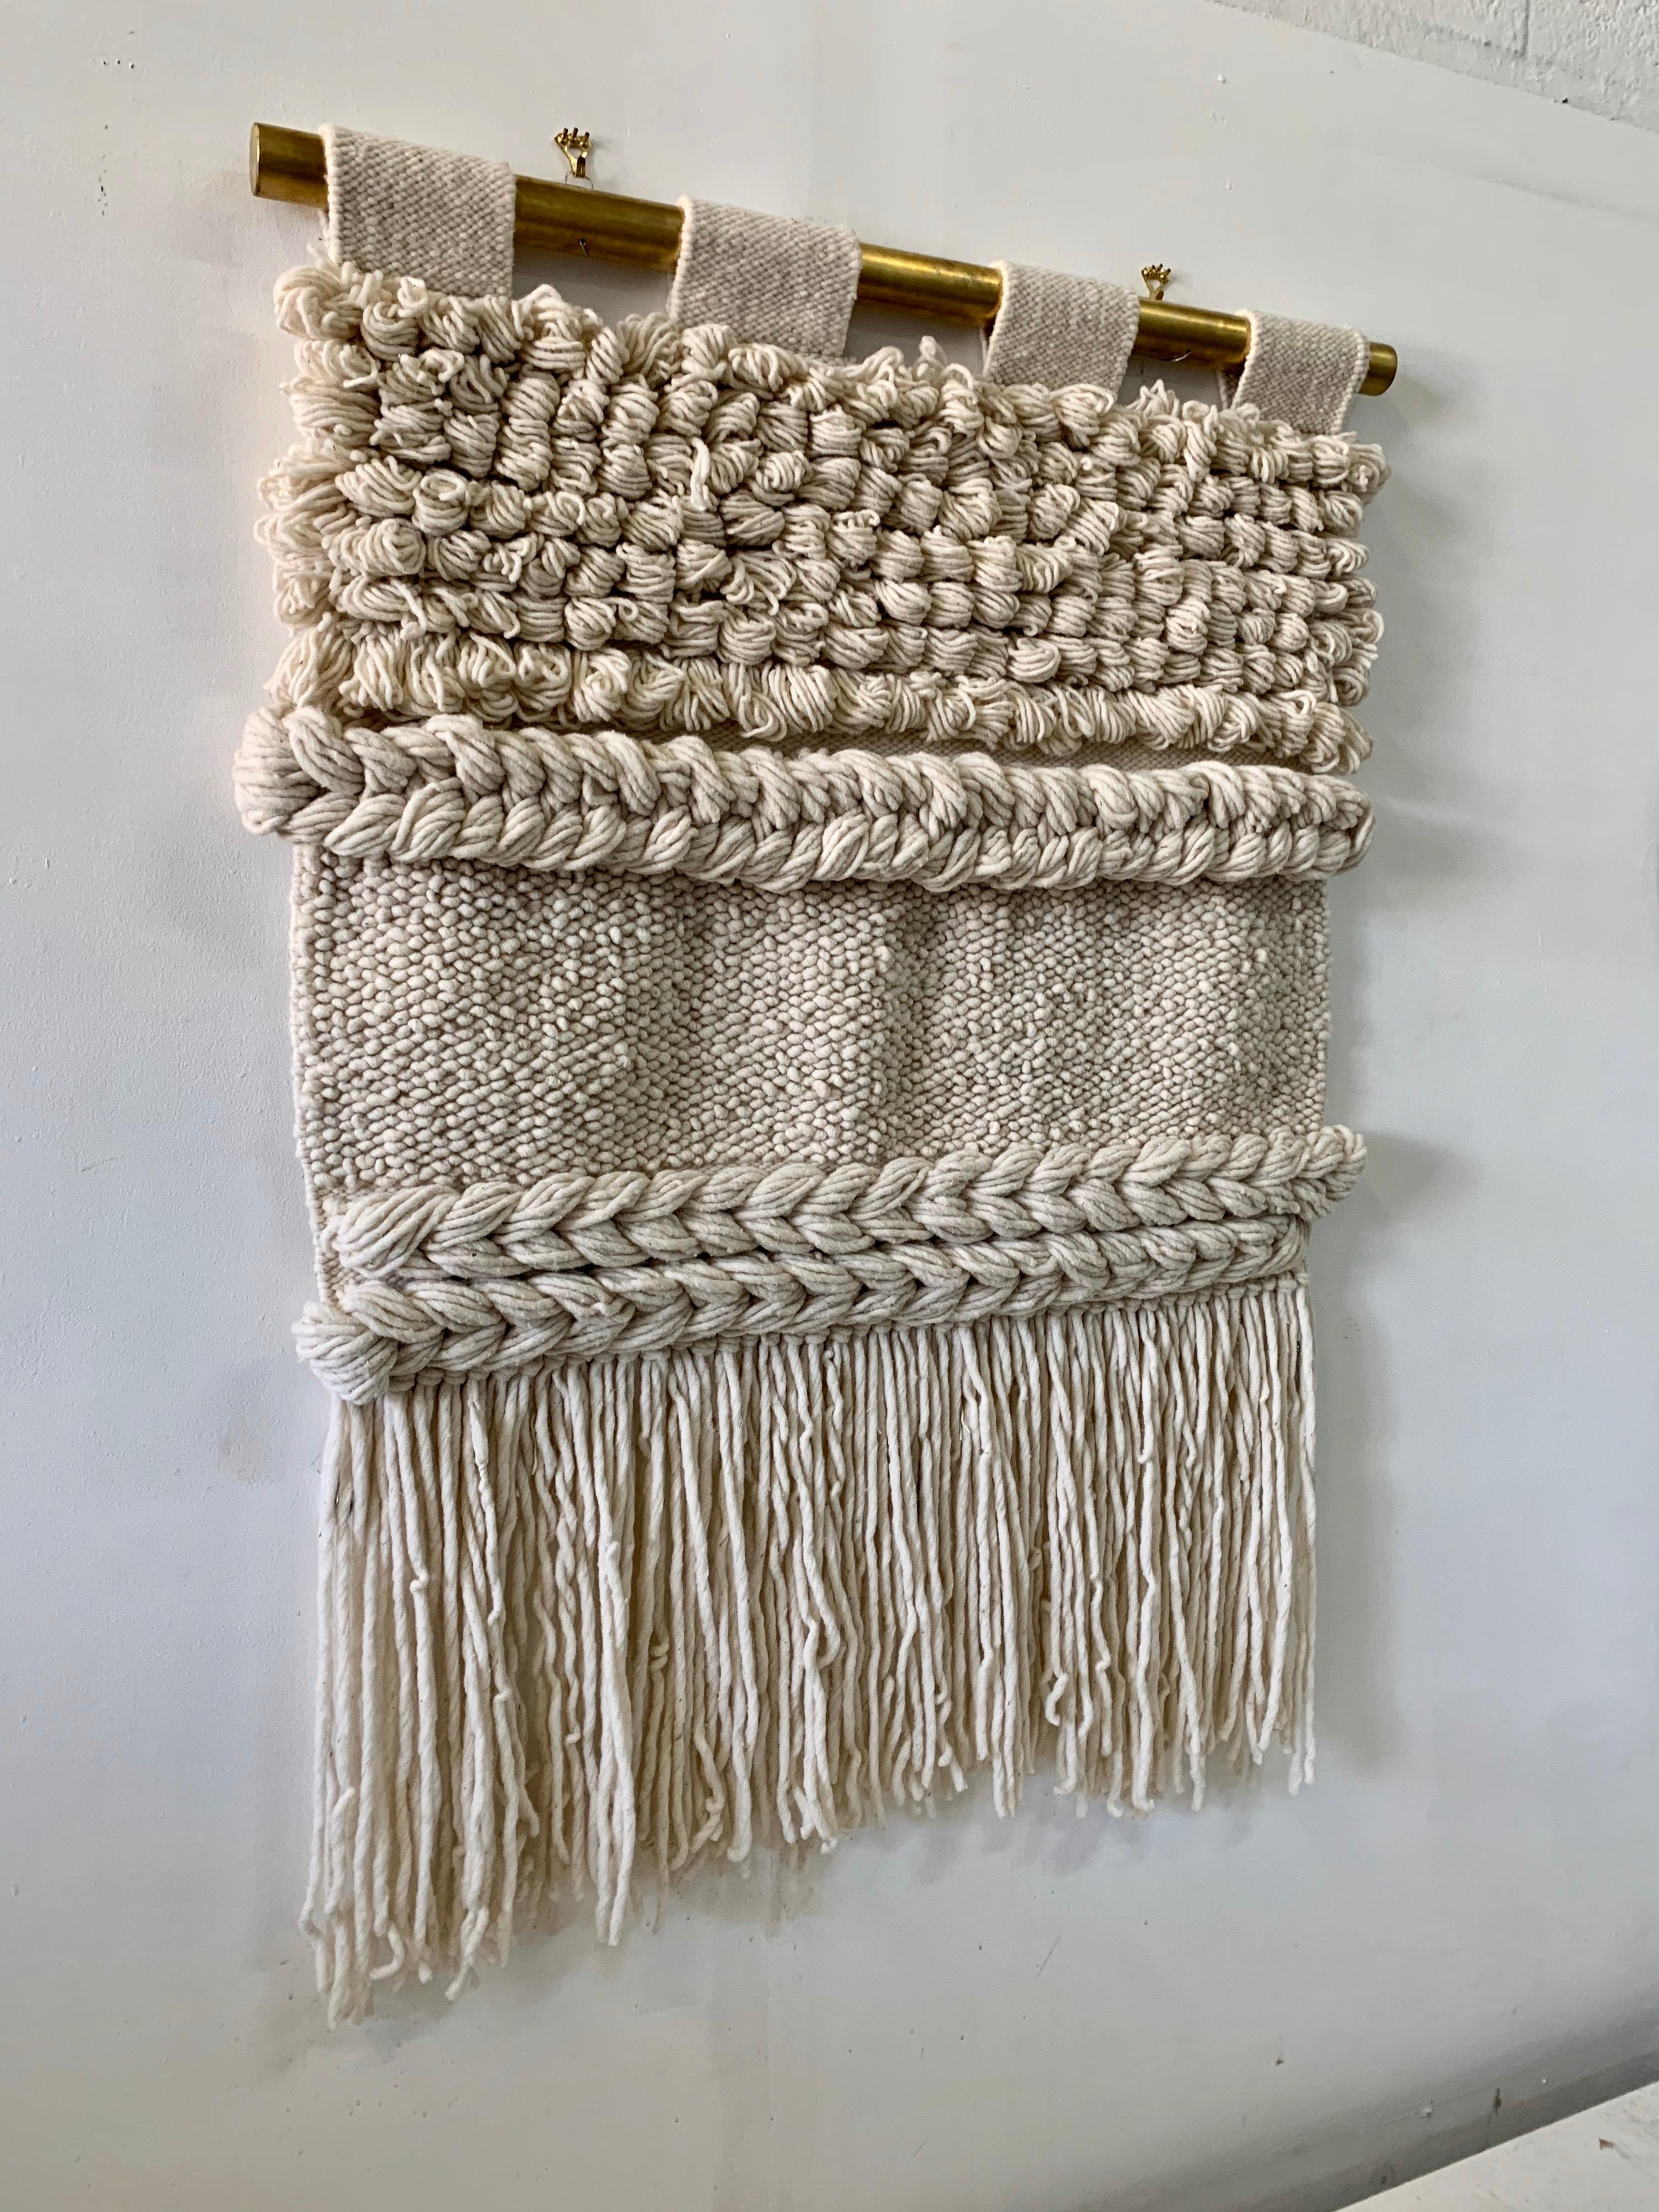 All natural beach style tapestry in non-died wool textile, woven by hand in this intricate and elegant design. The brass hanging rod has been custom designed for this piece for the best possible displaying and hanging. Details include thick loops